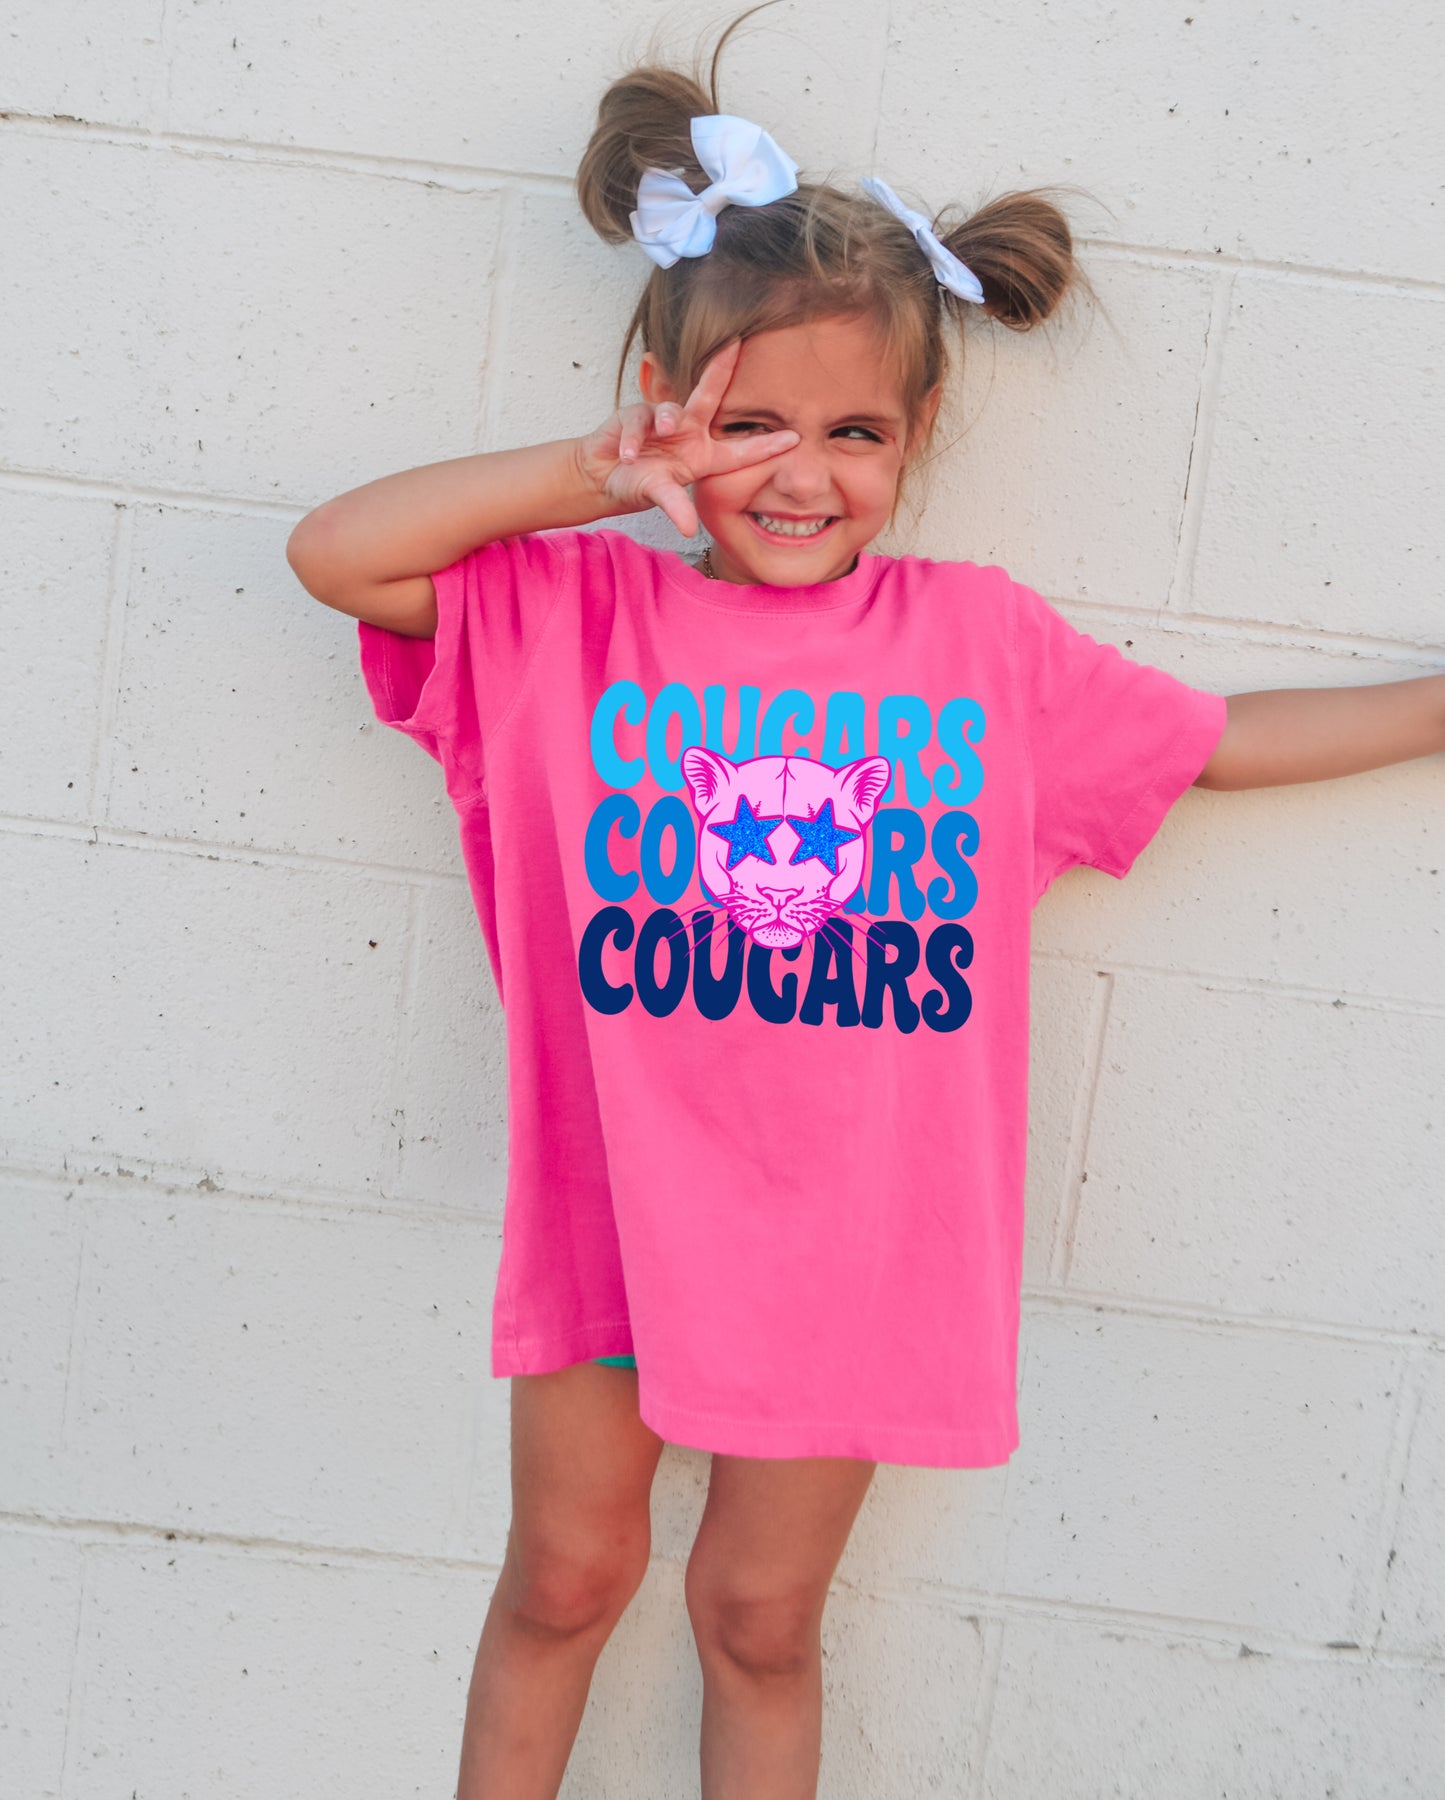 Comfort Colors Crenshaw Cougars Shirt/ Youth and Adult Sizes